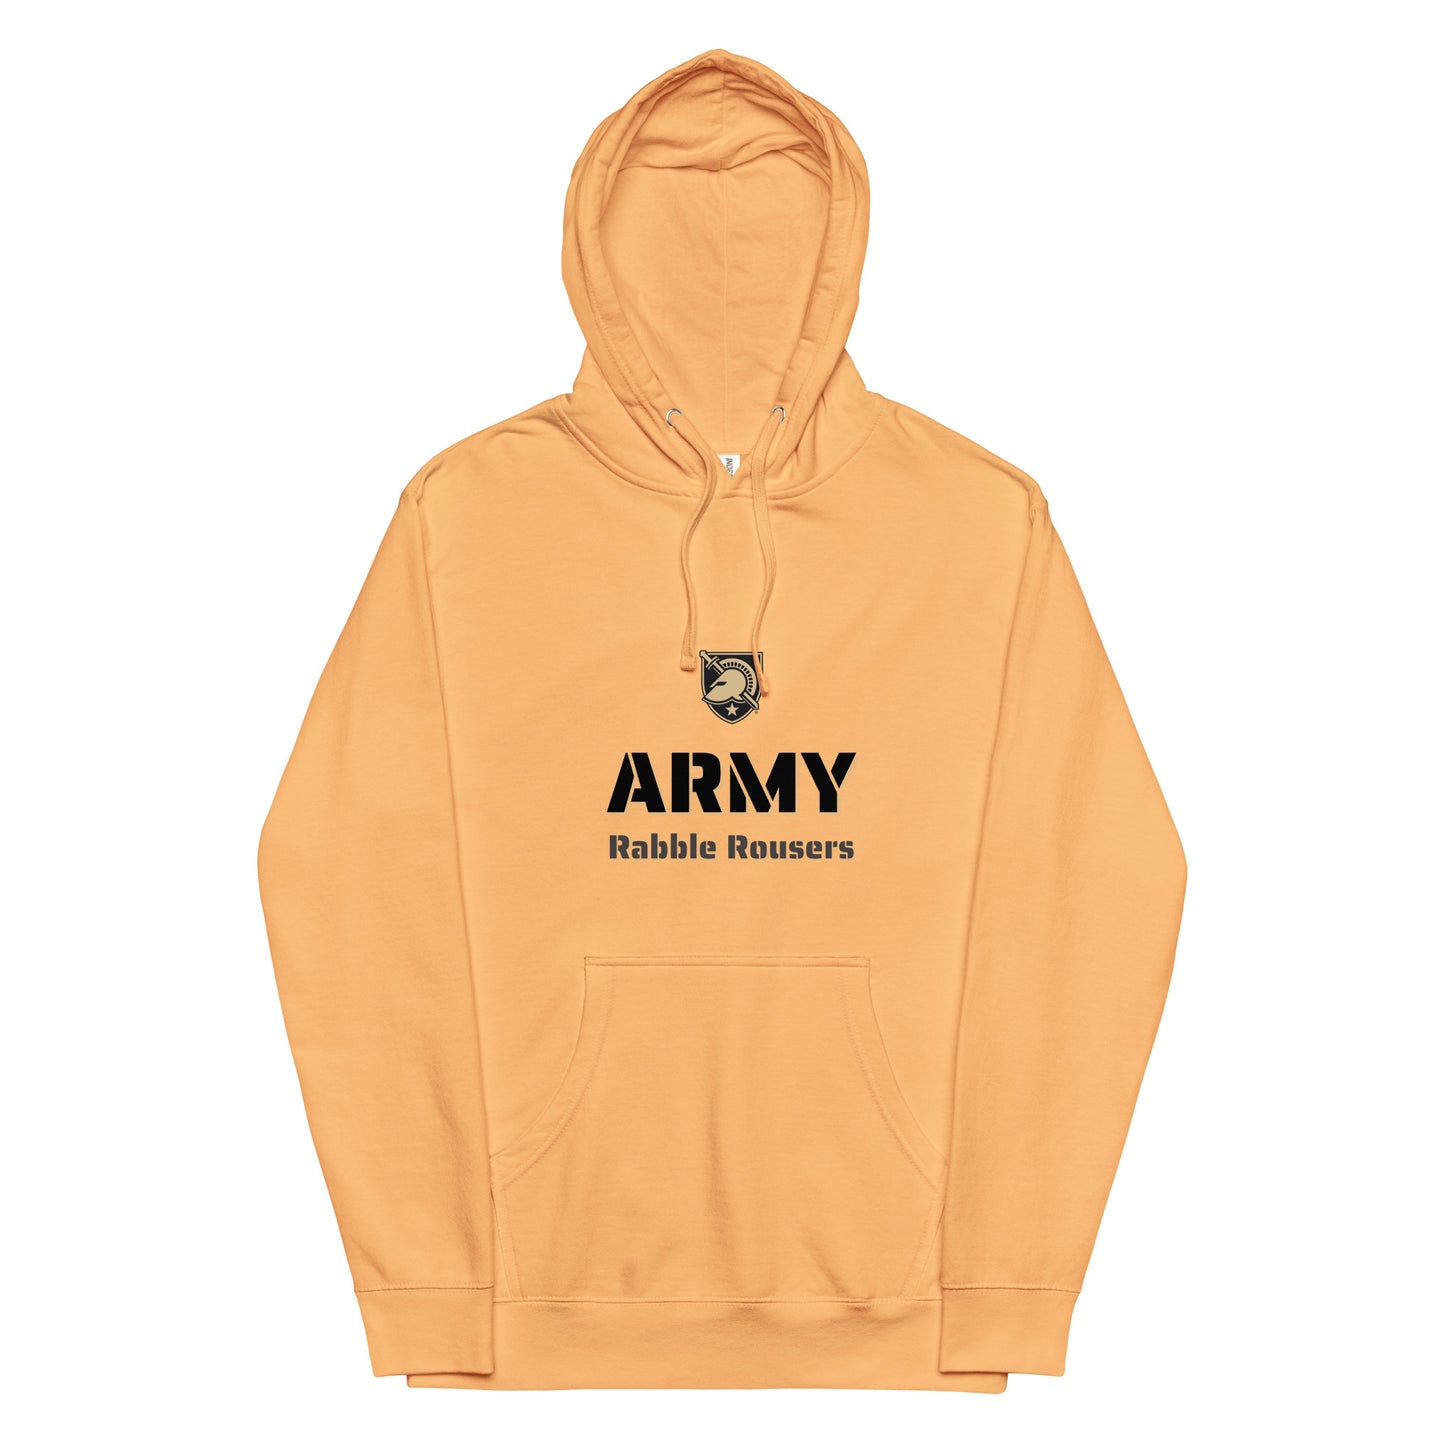 "Army Rabble Rousers"  Unisex midweight hoodie